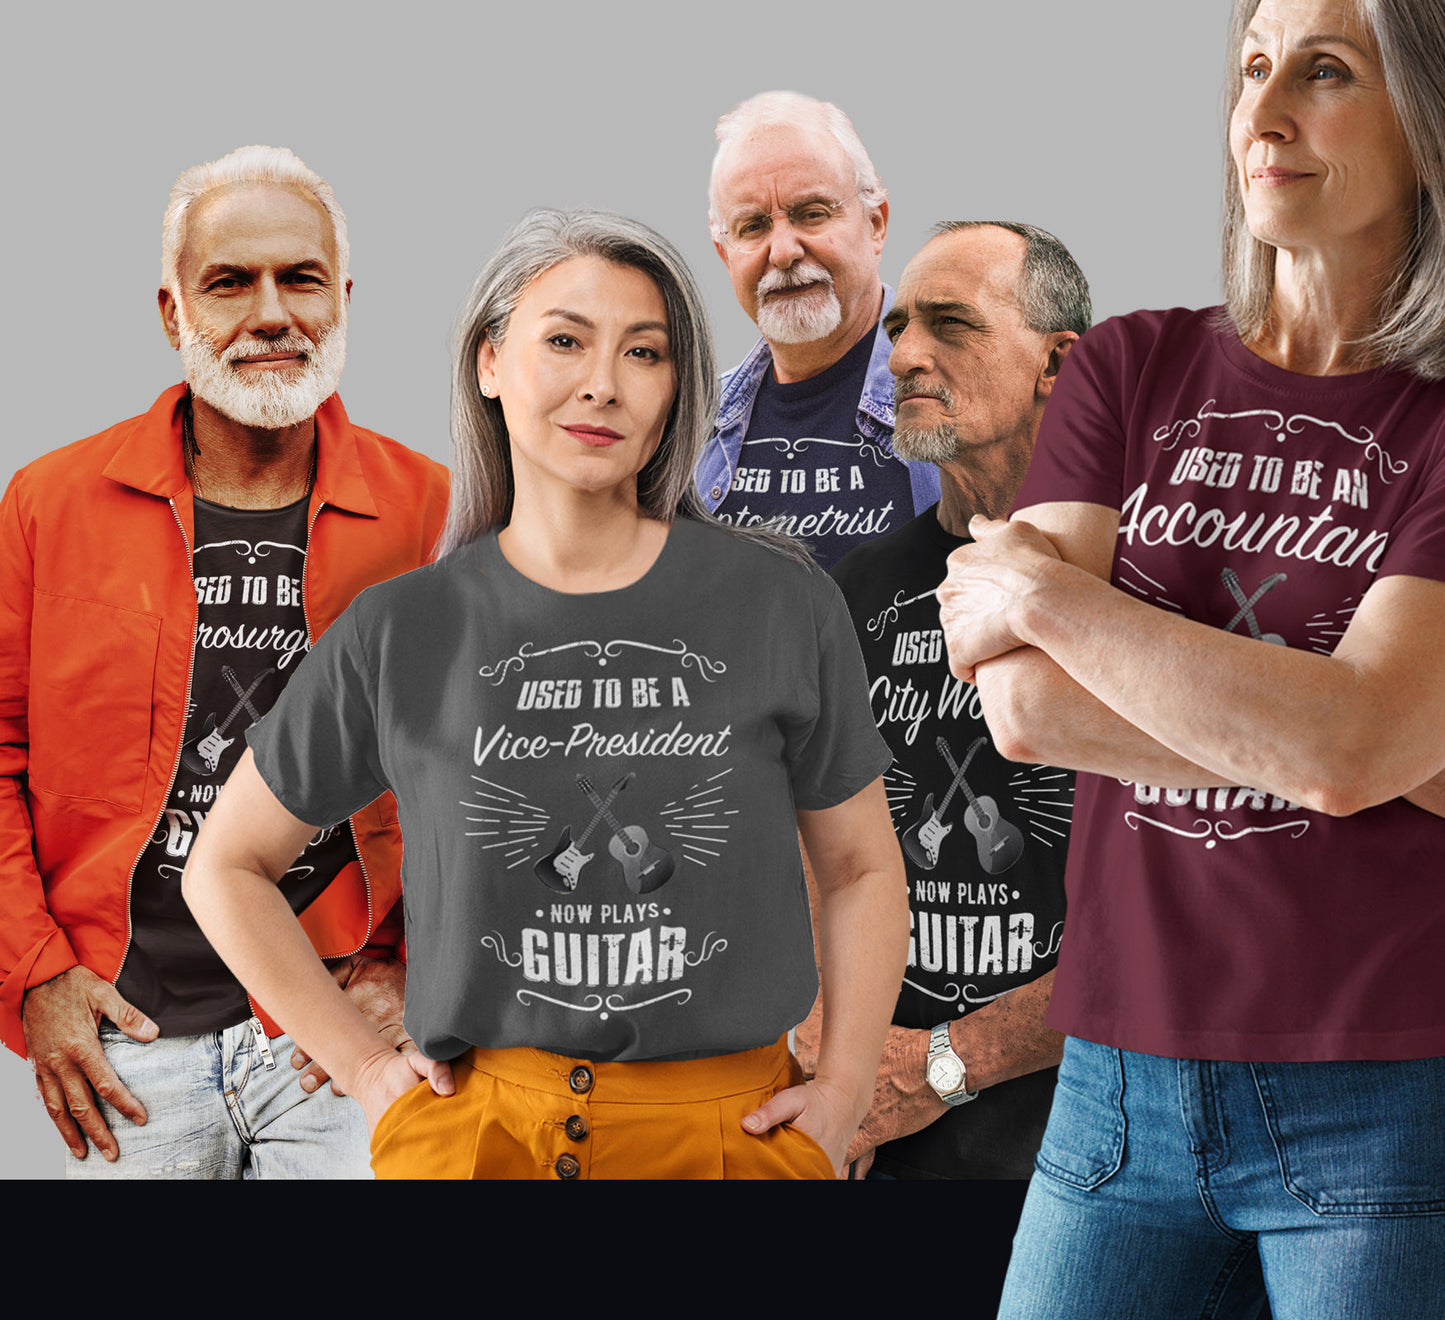 Used to be a POLICE OFFICER; Now Plays GUITAR - Funny Retirement Gift, Unisex T-shirt Bella+Canvas 3001, dark colors for amateur musician/guitar player